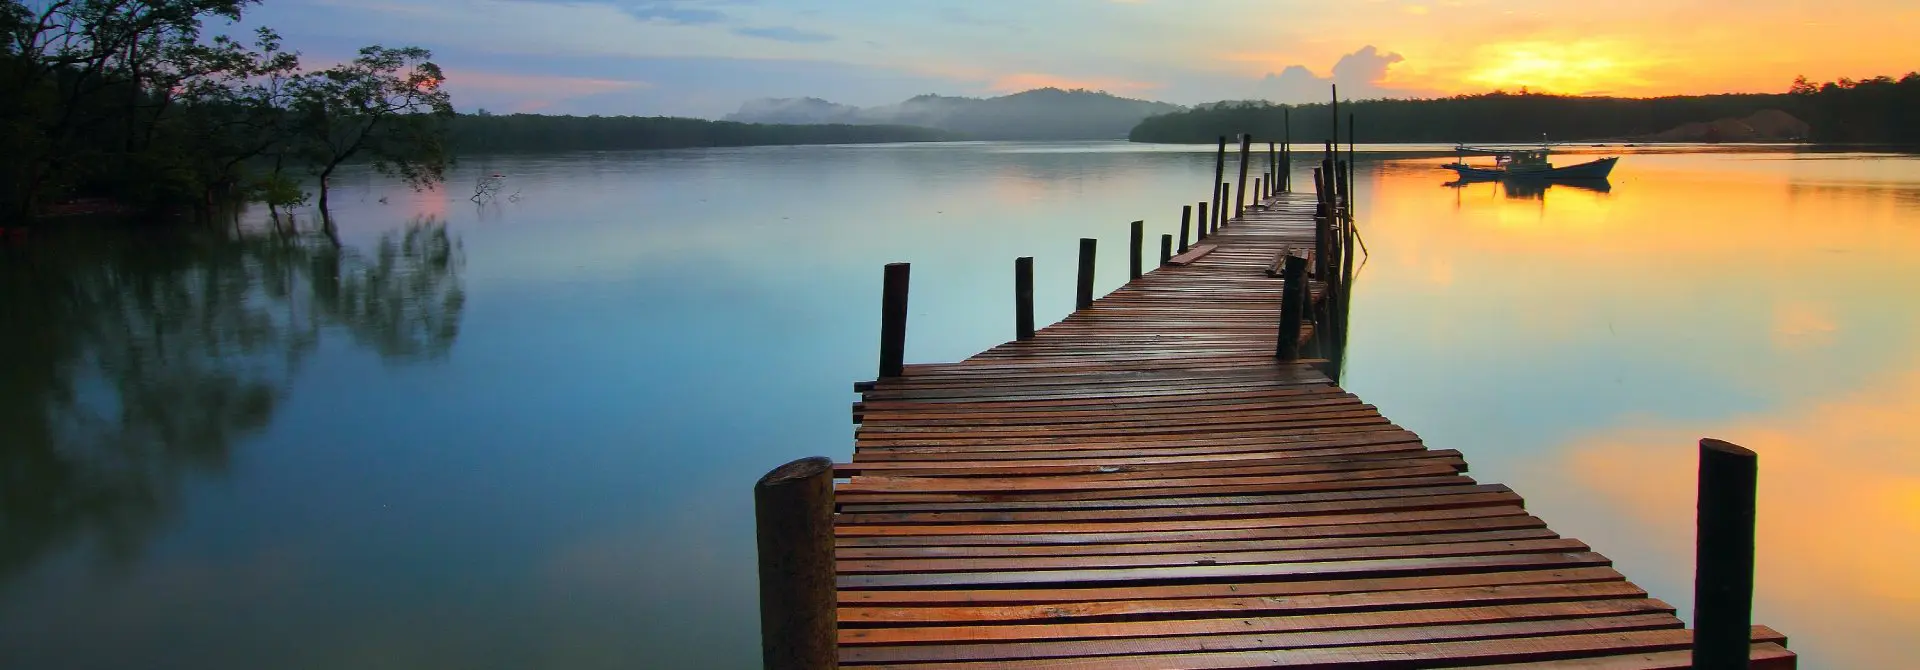 A dock with wooden posts and water in the background.